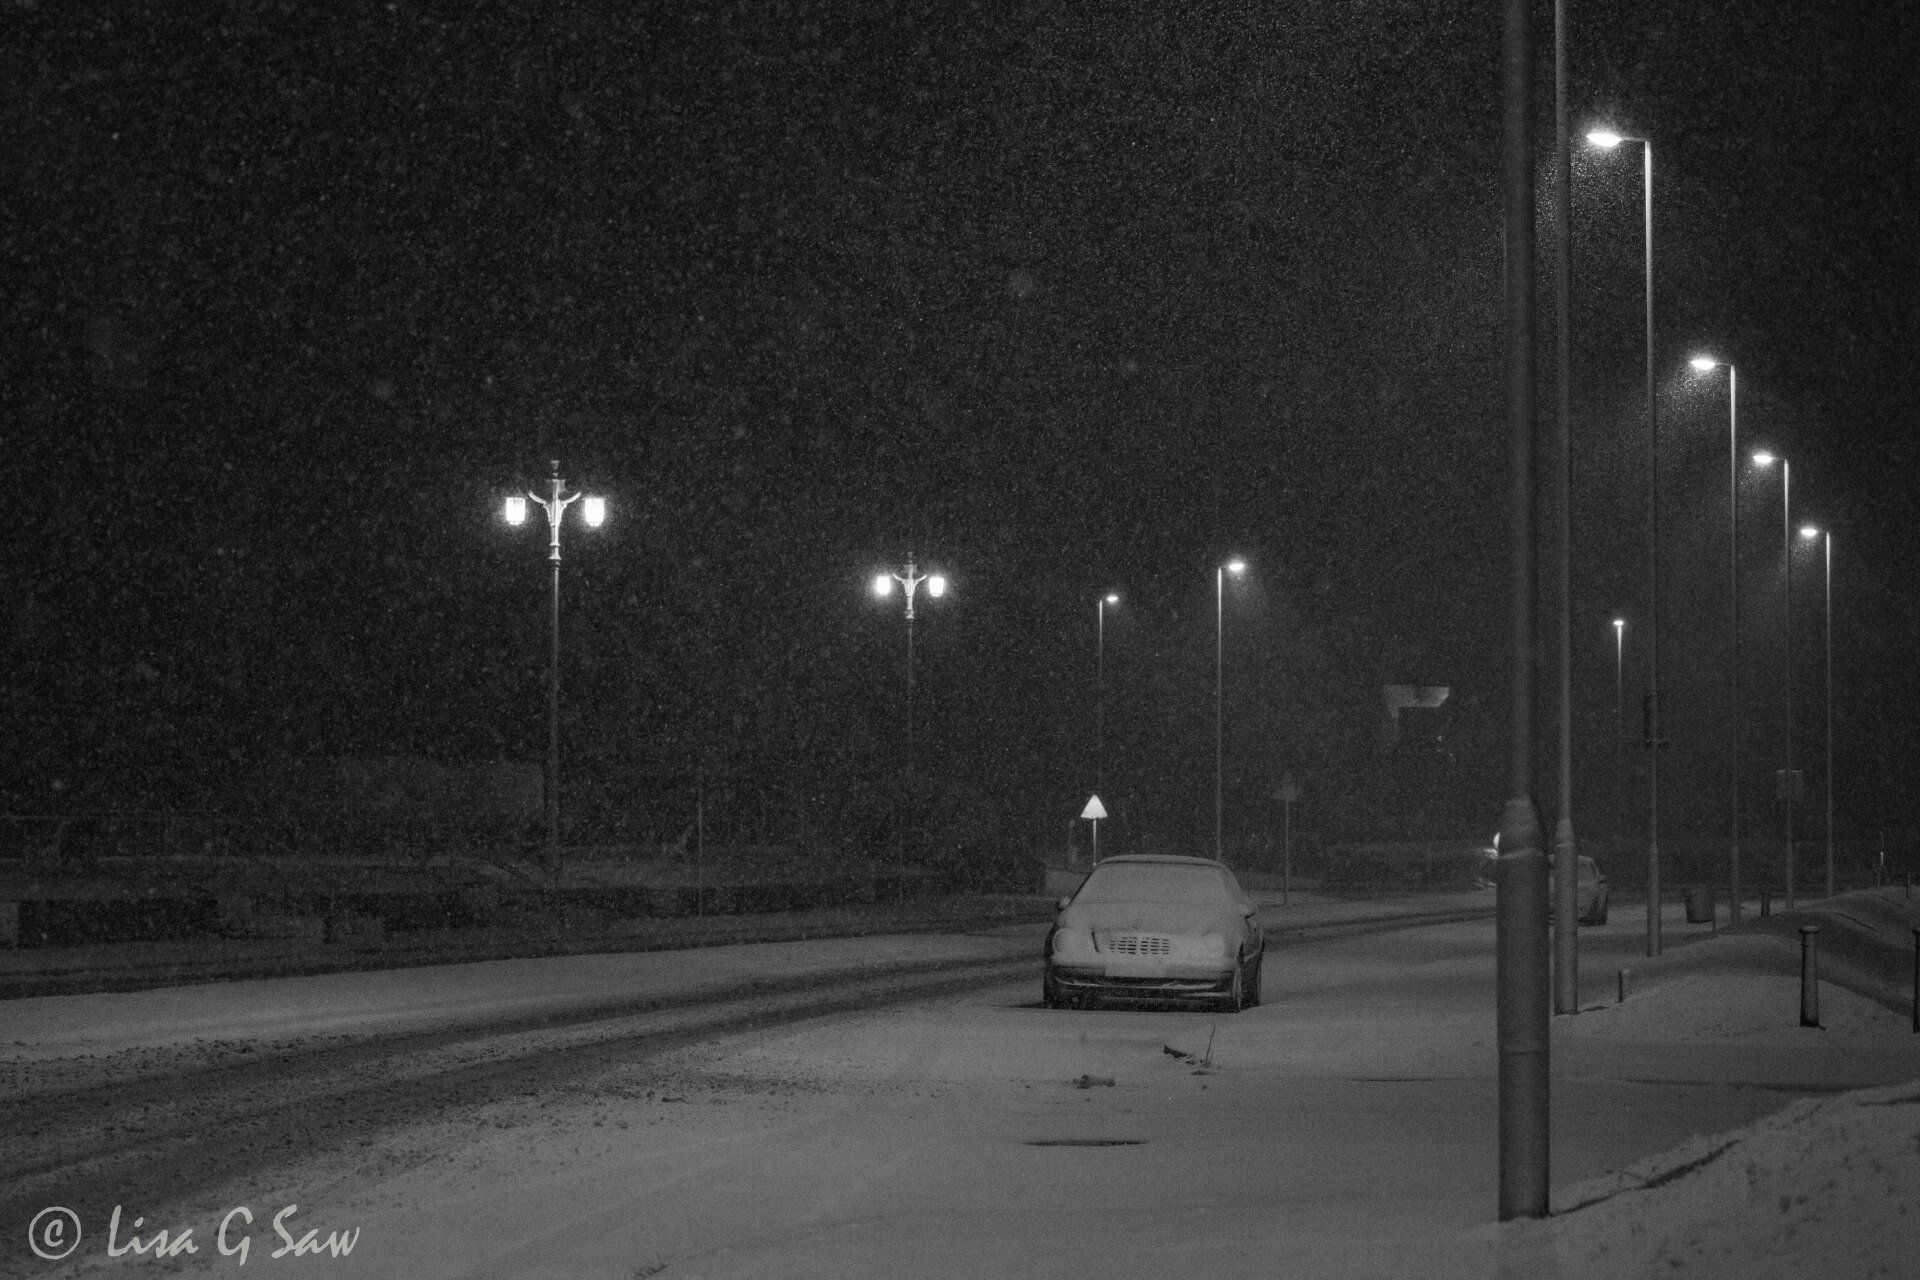 Car covered in snow with street light, snowing at night